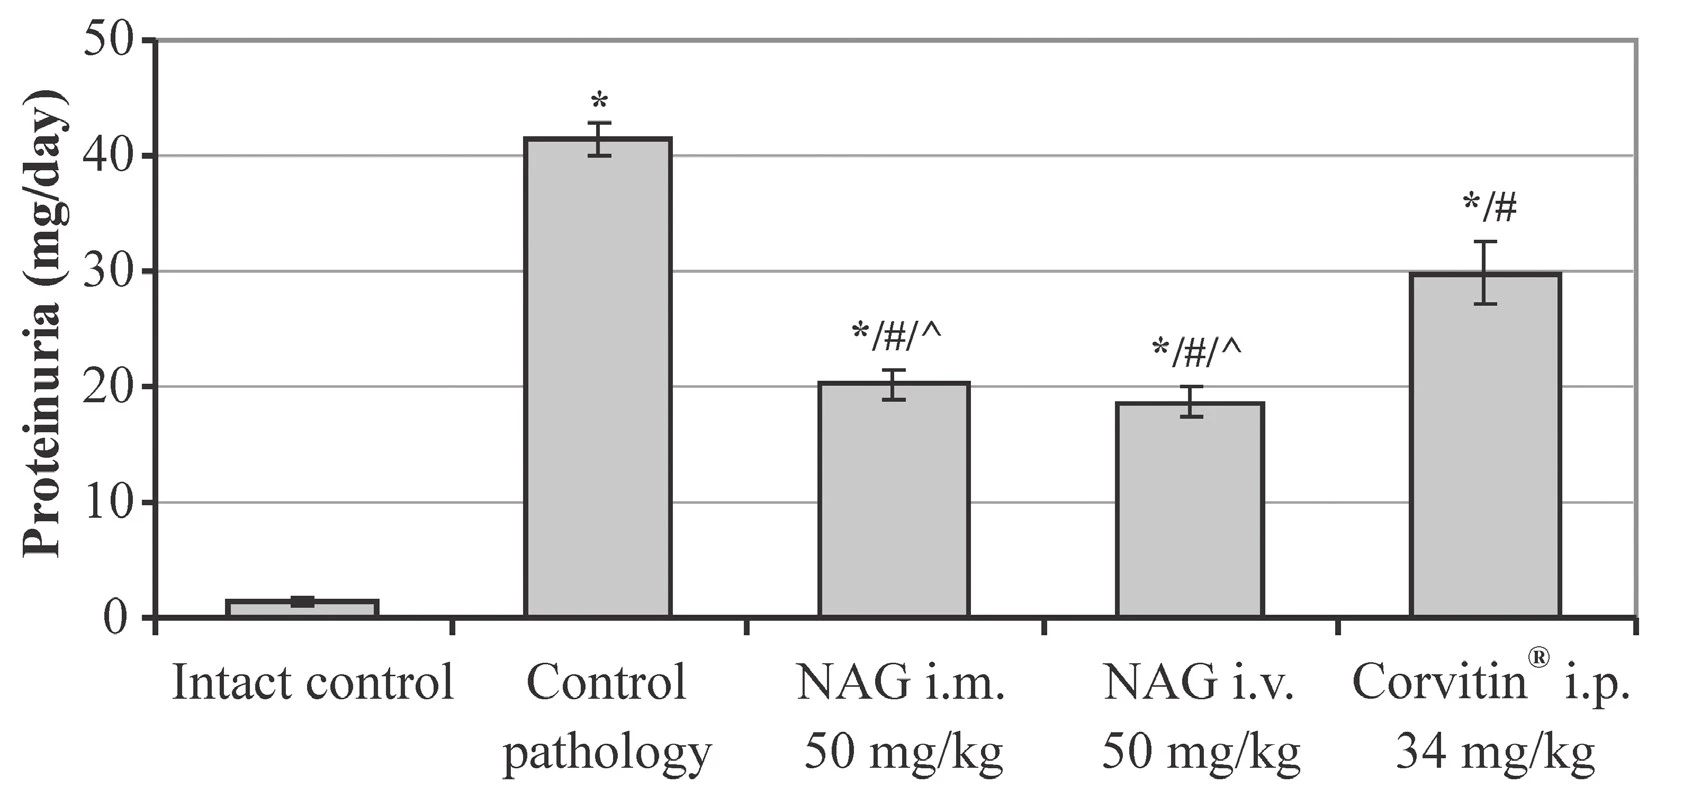 The influence of NAG on the proteinuria in rats with AKI (M ± SE, n = 48)<br>
* significant relative to the intact control group (p < 0.05)<br>
# significant relative to the control pathology group (p < 0.05)<br>
^ significant relative to the animals treated with Corvitin® (p < 0.05)<br>
n – number of animals in the experiment